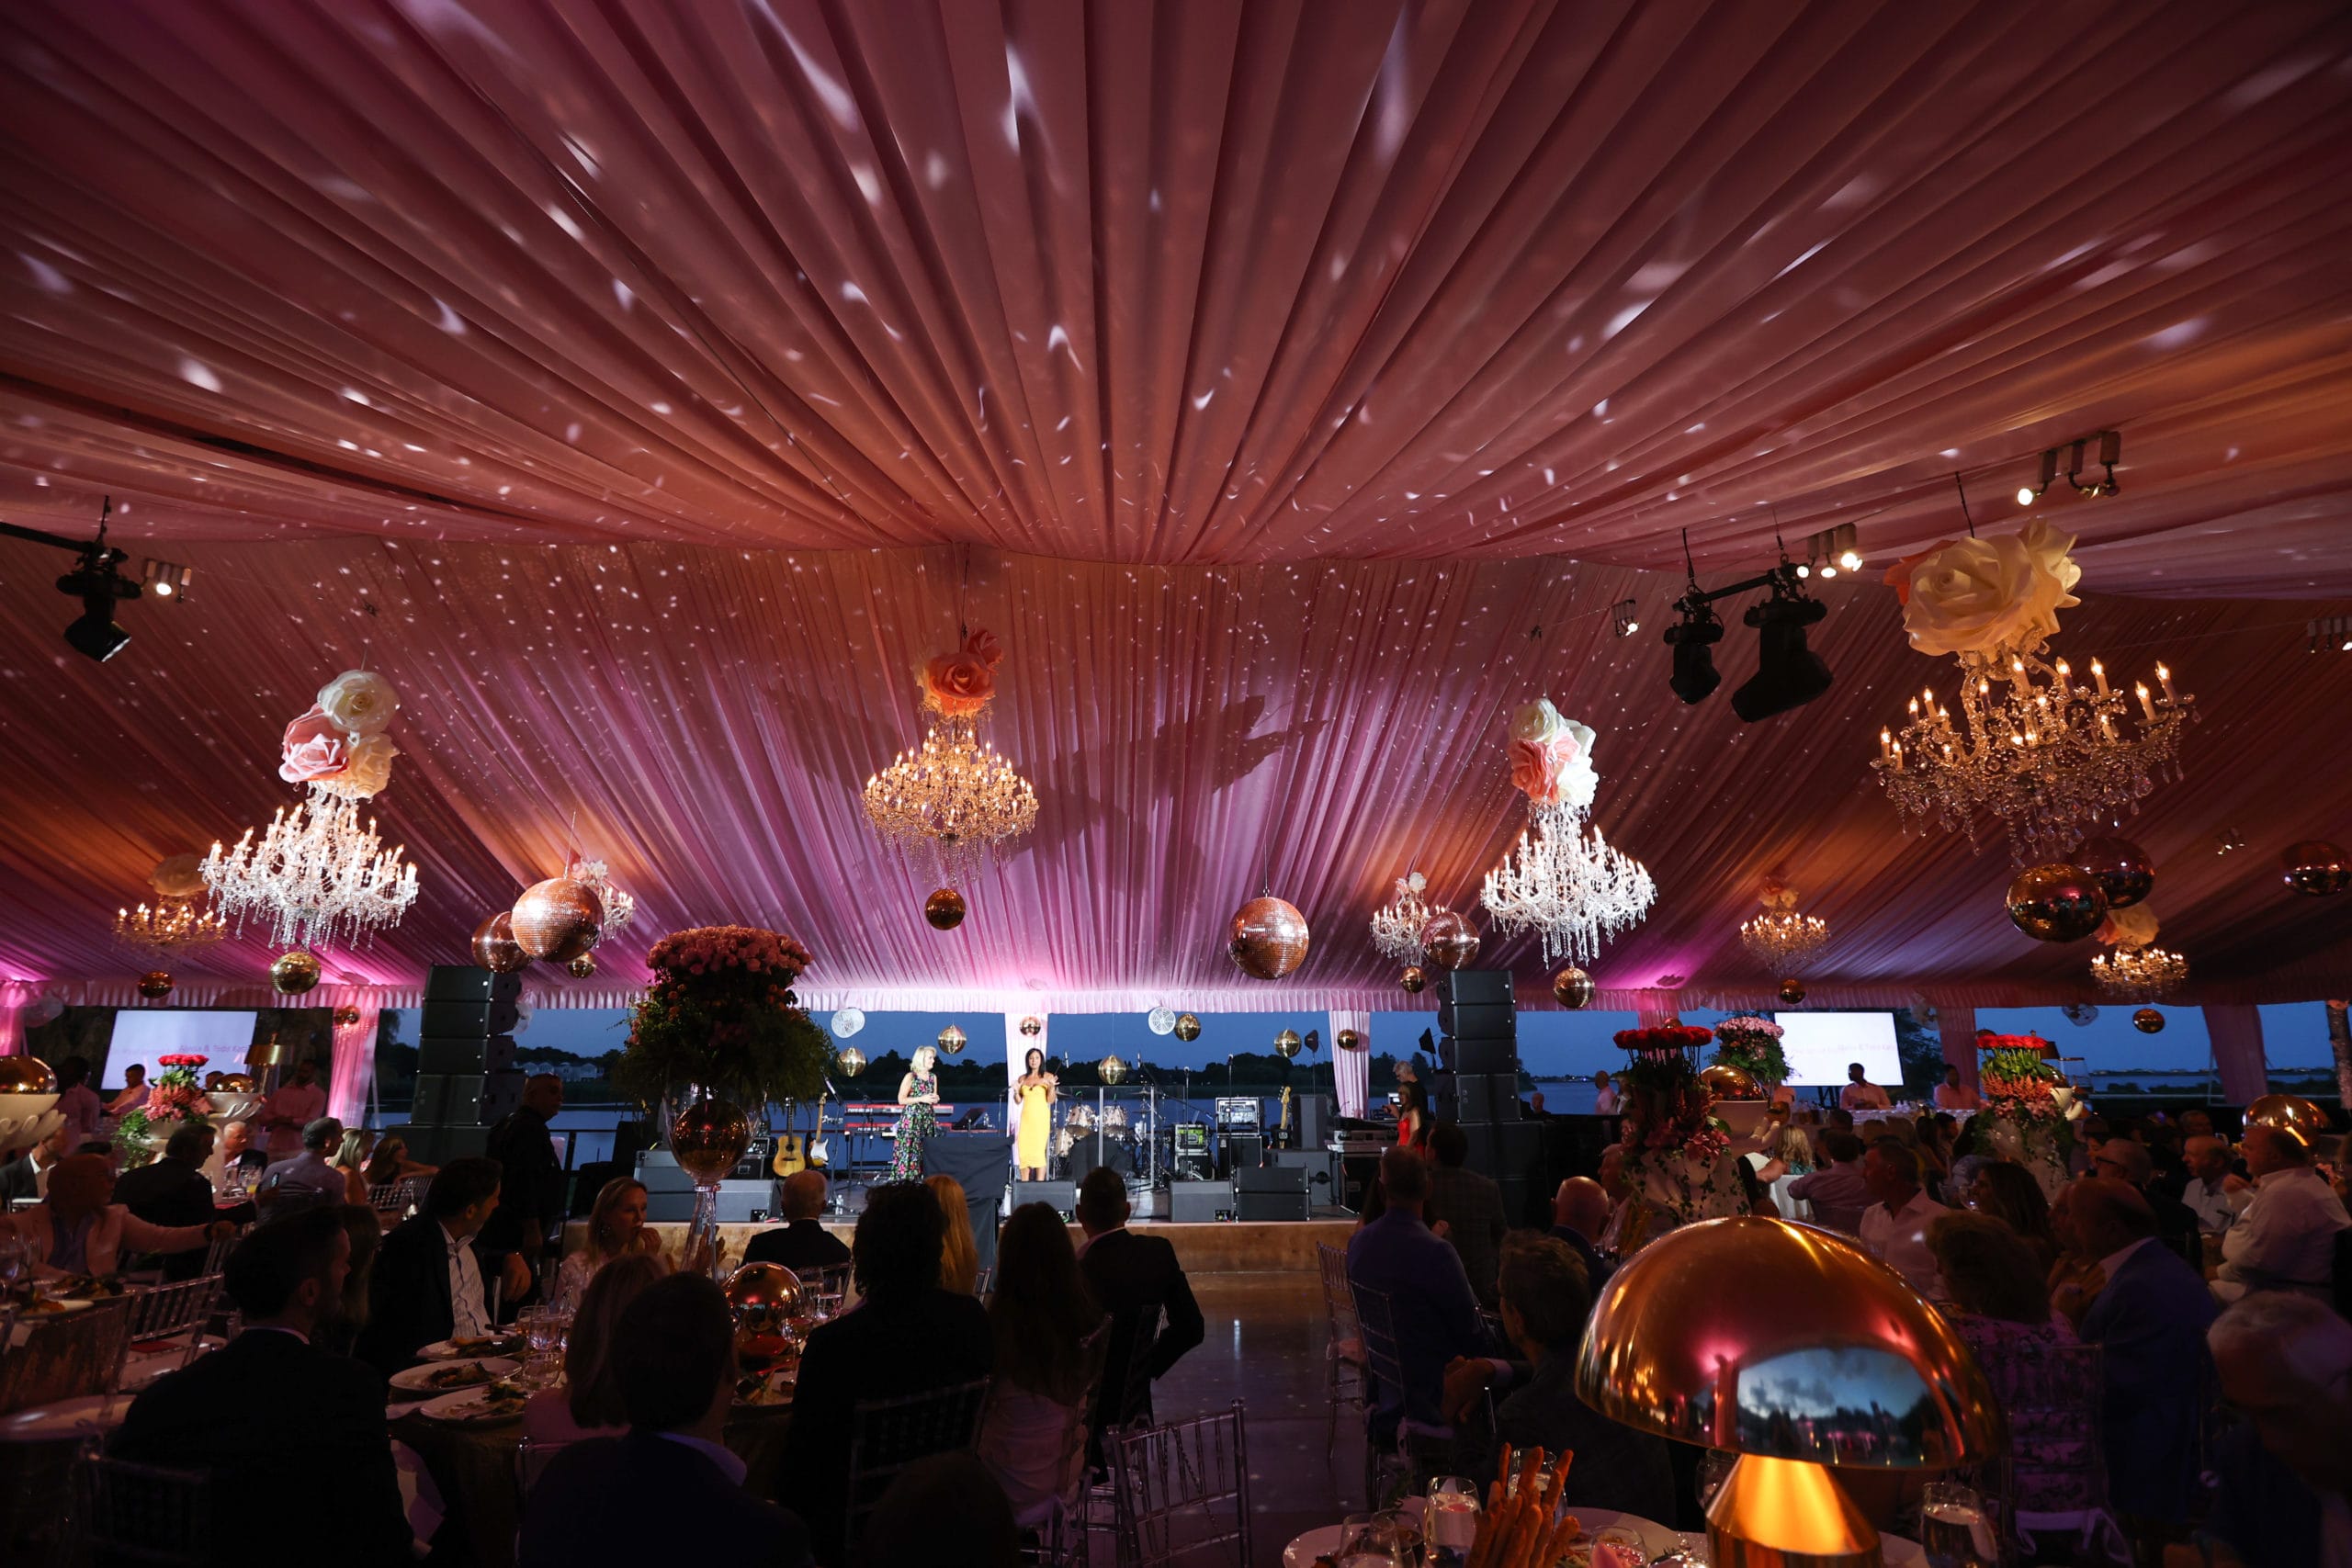 Northwell Health Summer Hamptons Evening Event Raises Nearly $1M  For Women’s Health Research And Programs